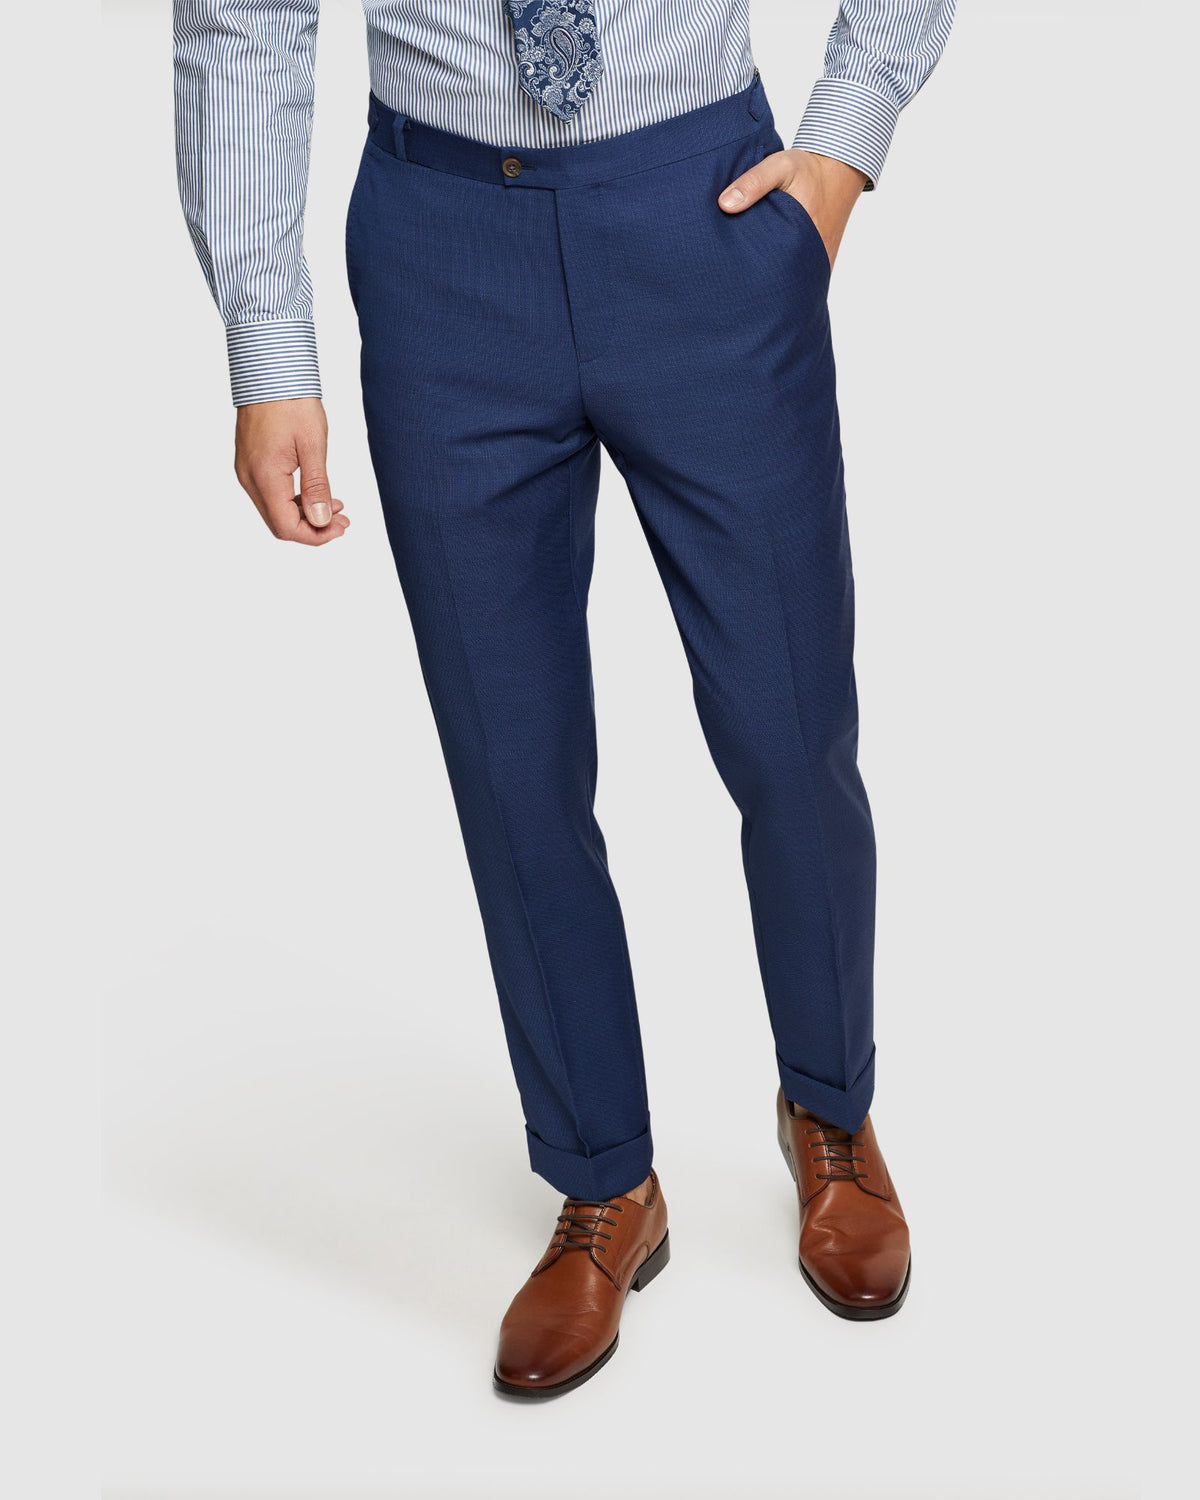 Pants With Cuff Dark Blue Men Slim Fit Business Pants With Side Adjusters